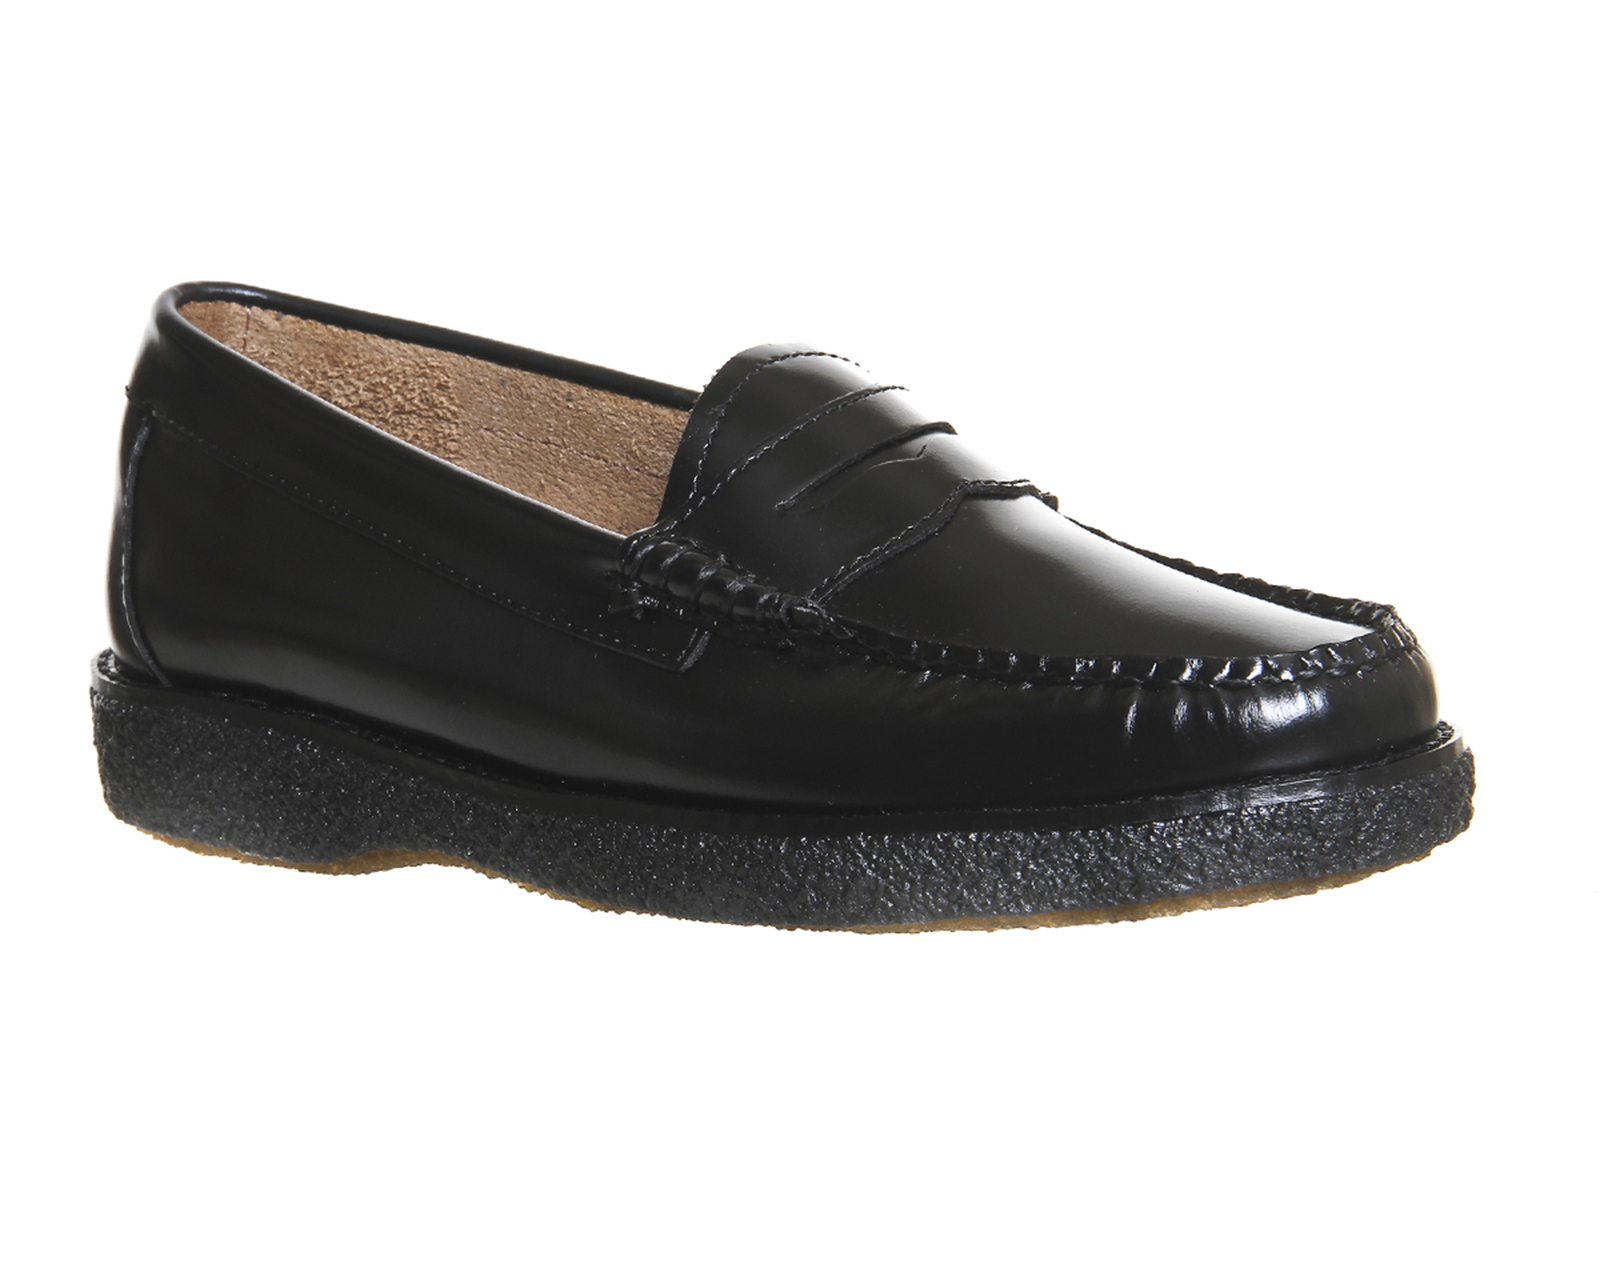 Lyst - G.H. Bass & Co. Crepe Sole Penny Loafers in Black